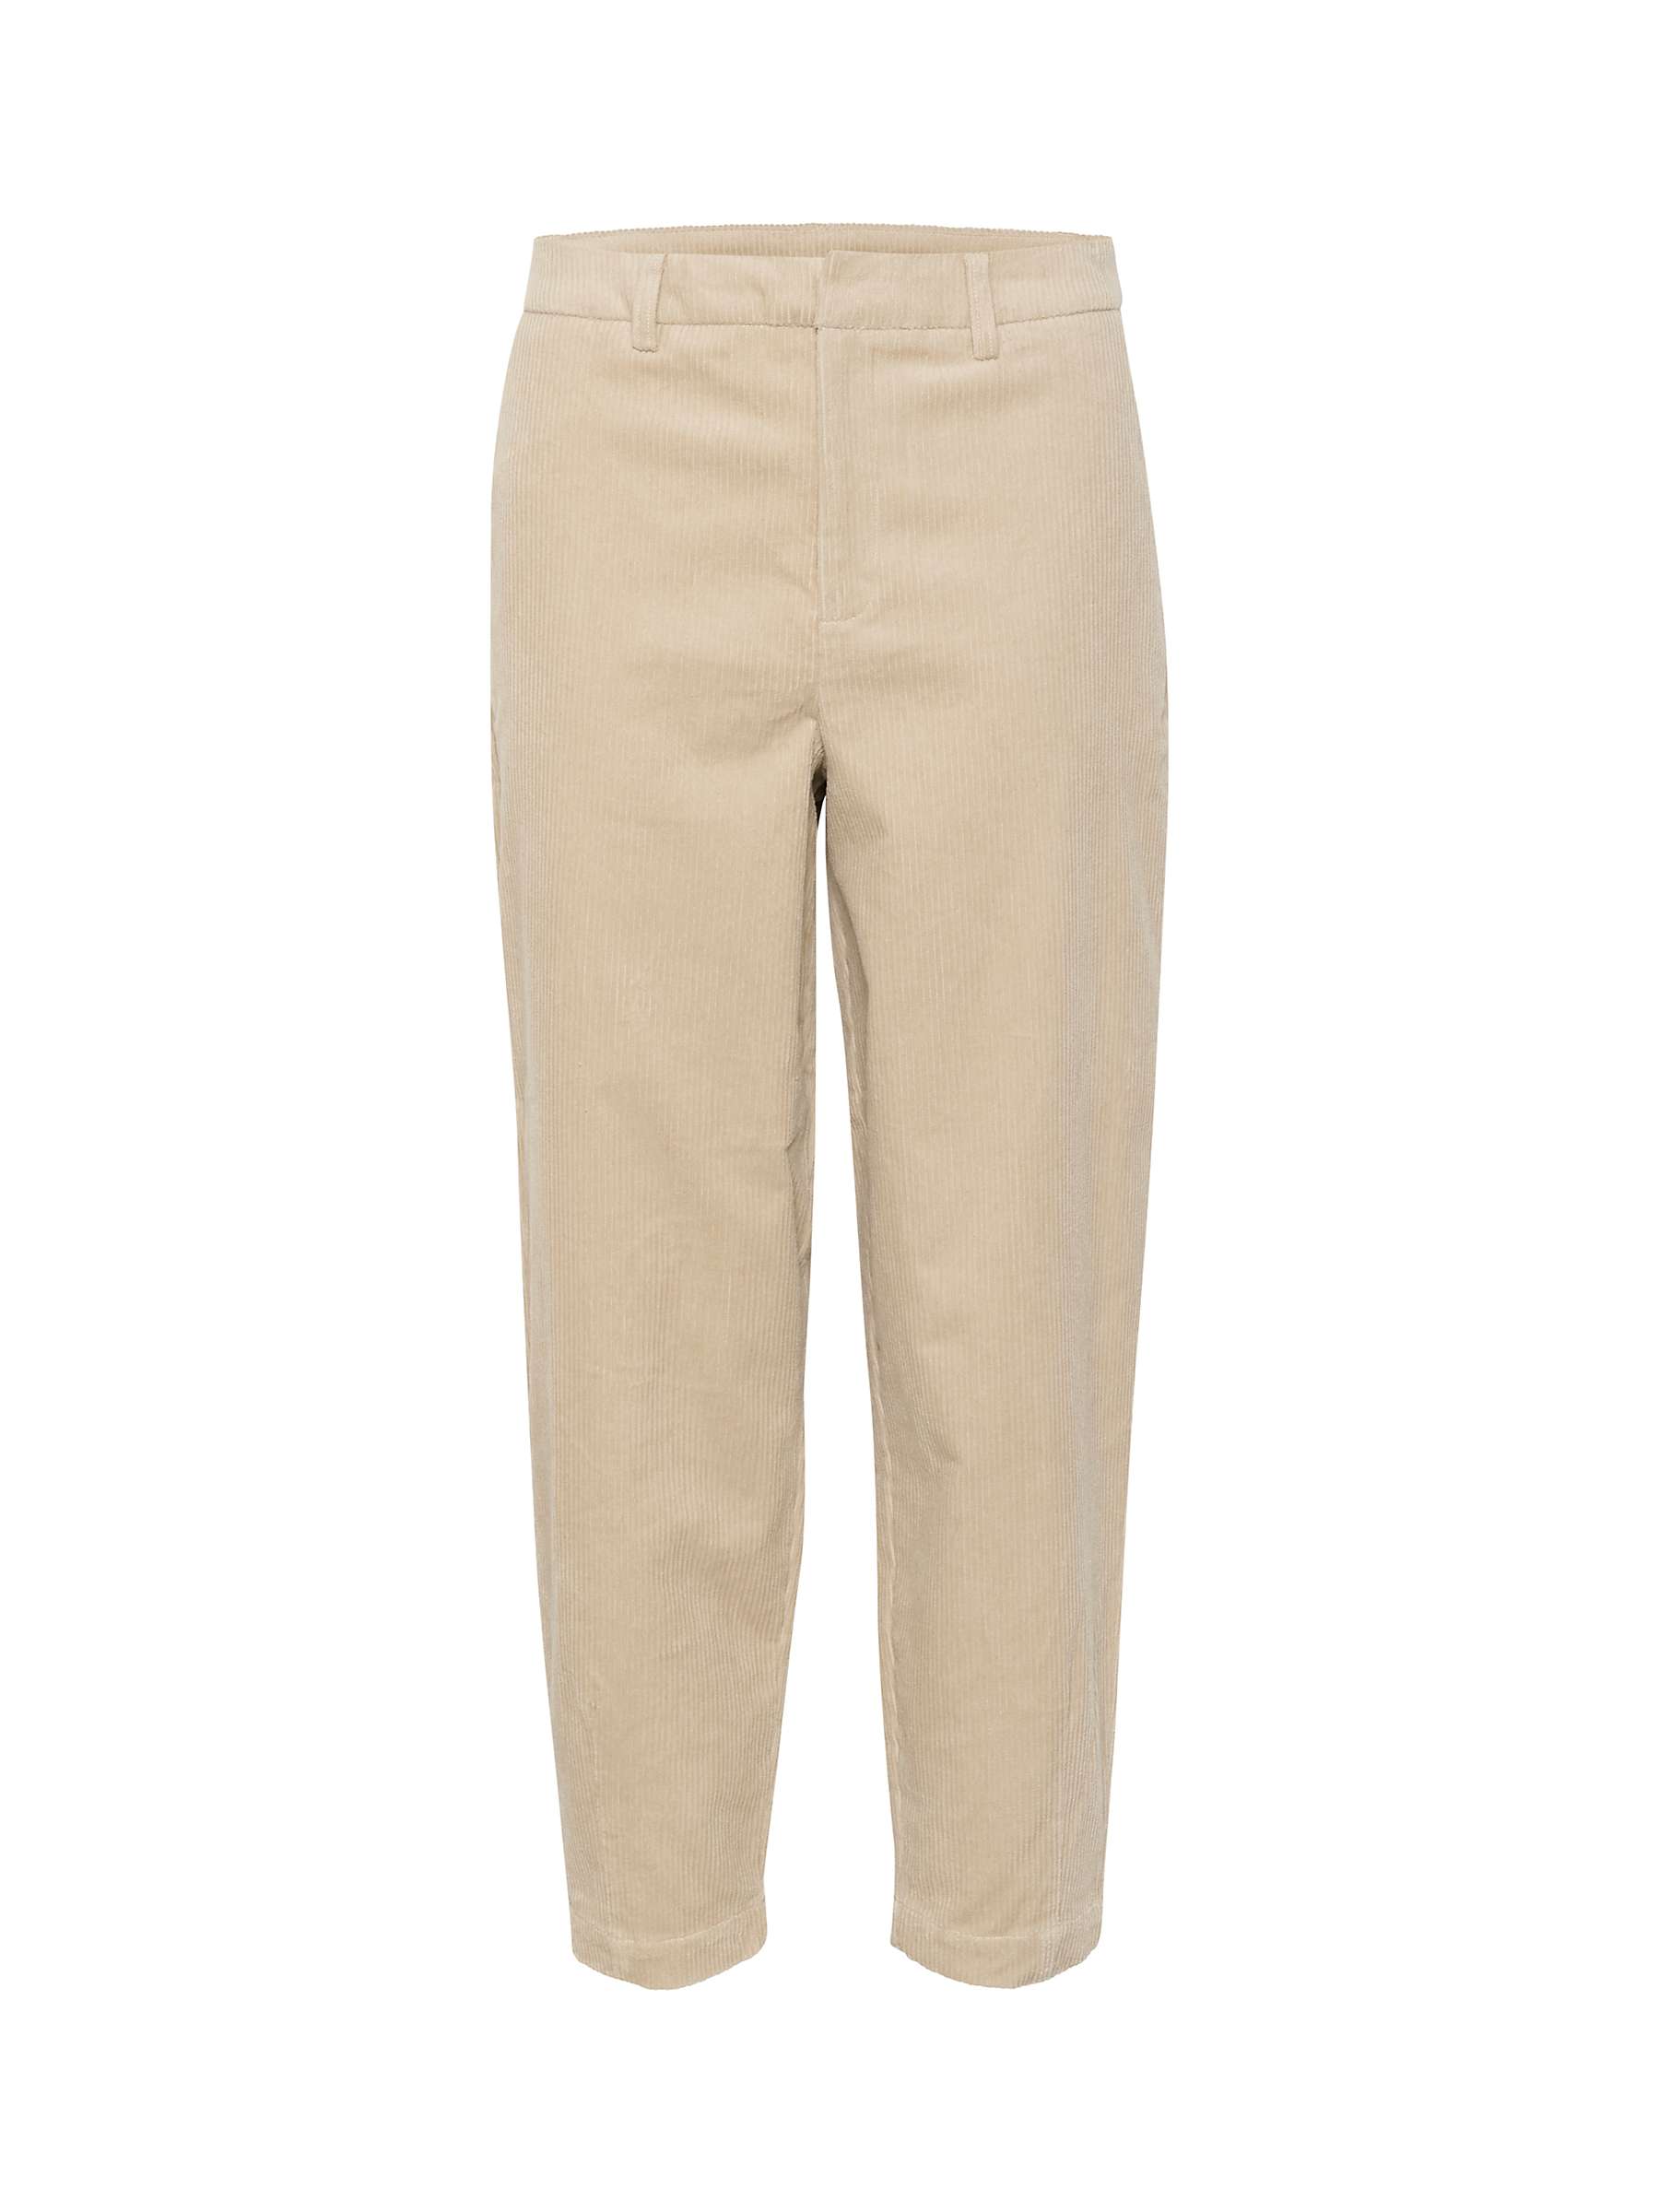 Buy KAFFE Meloi Corduroy Trousers, Feather Grey Online at johnlewis.com